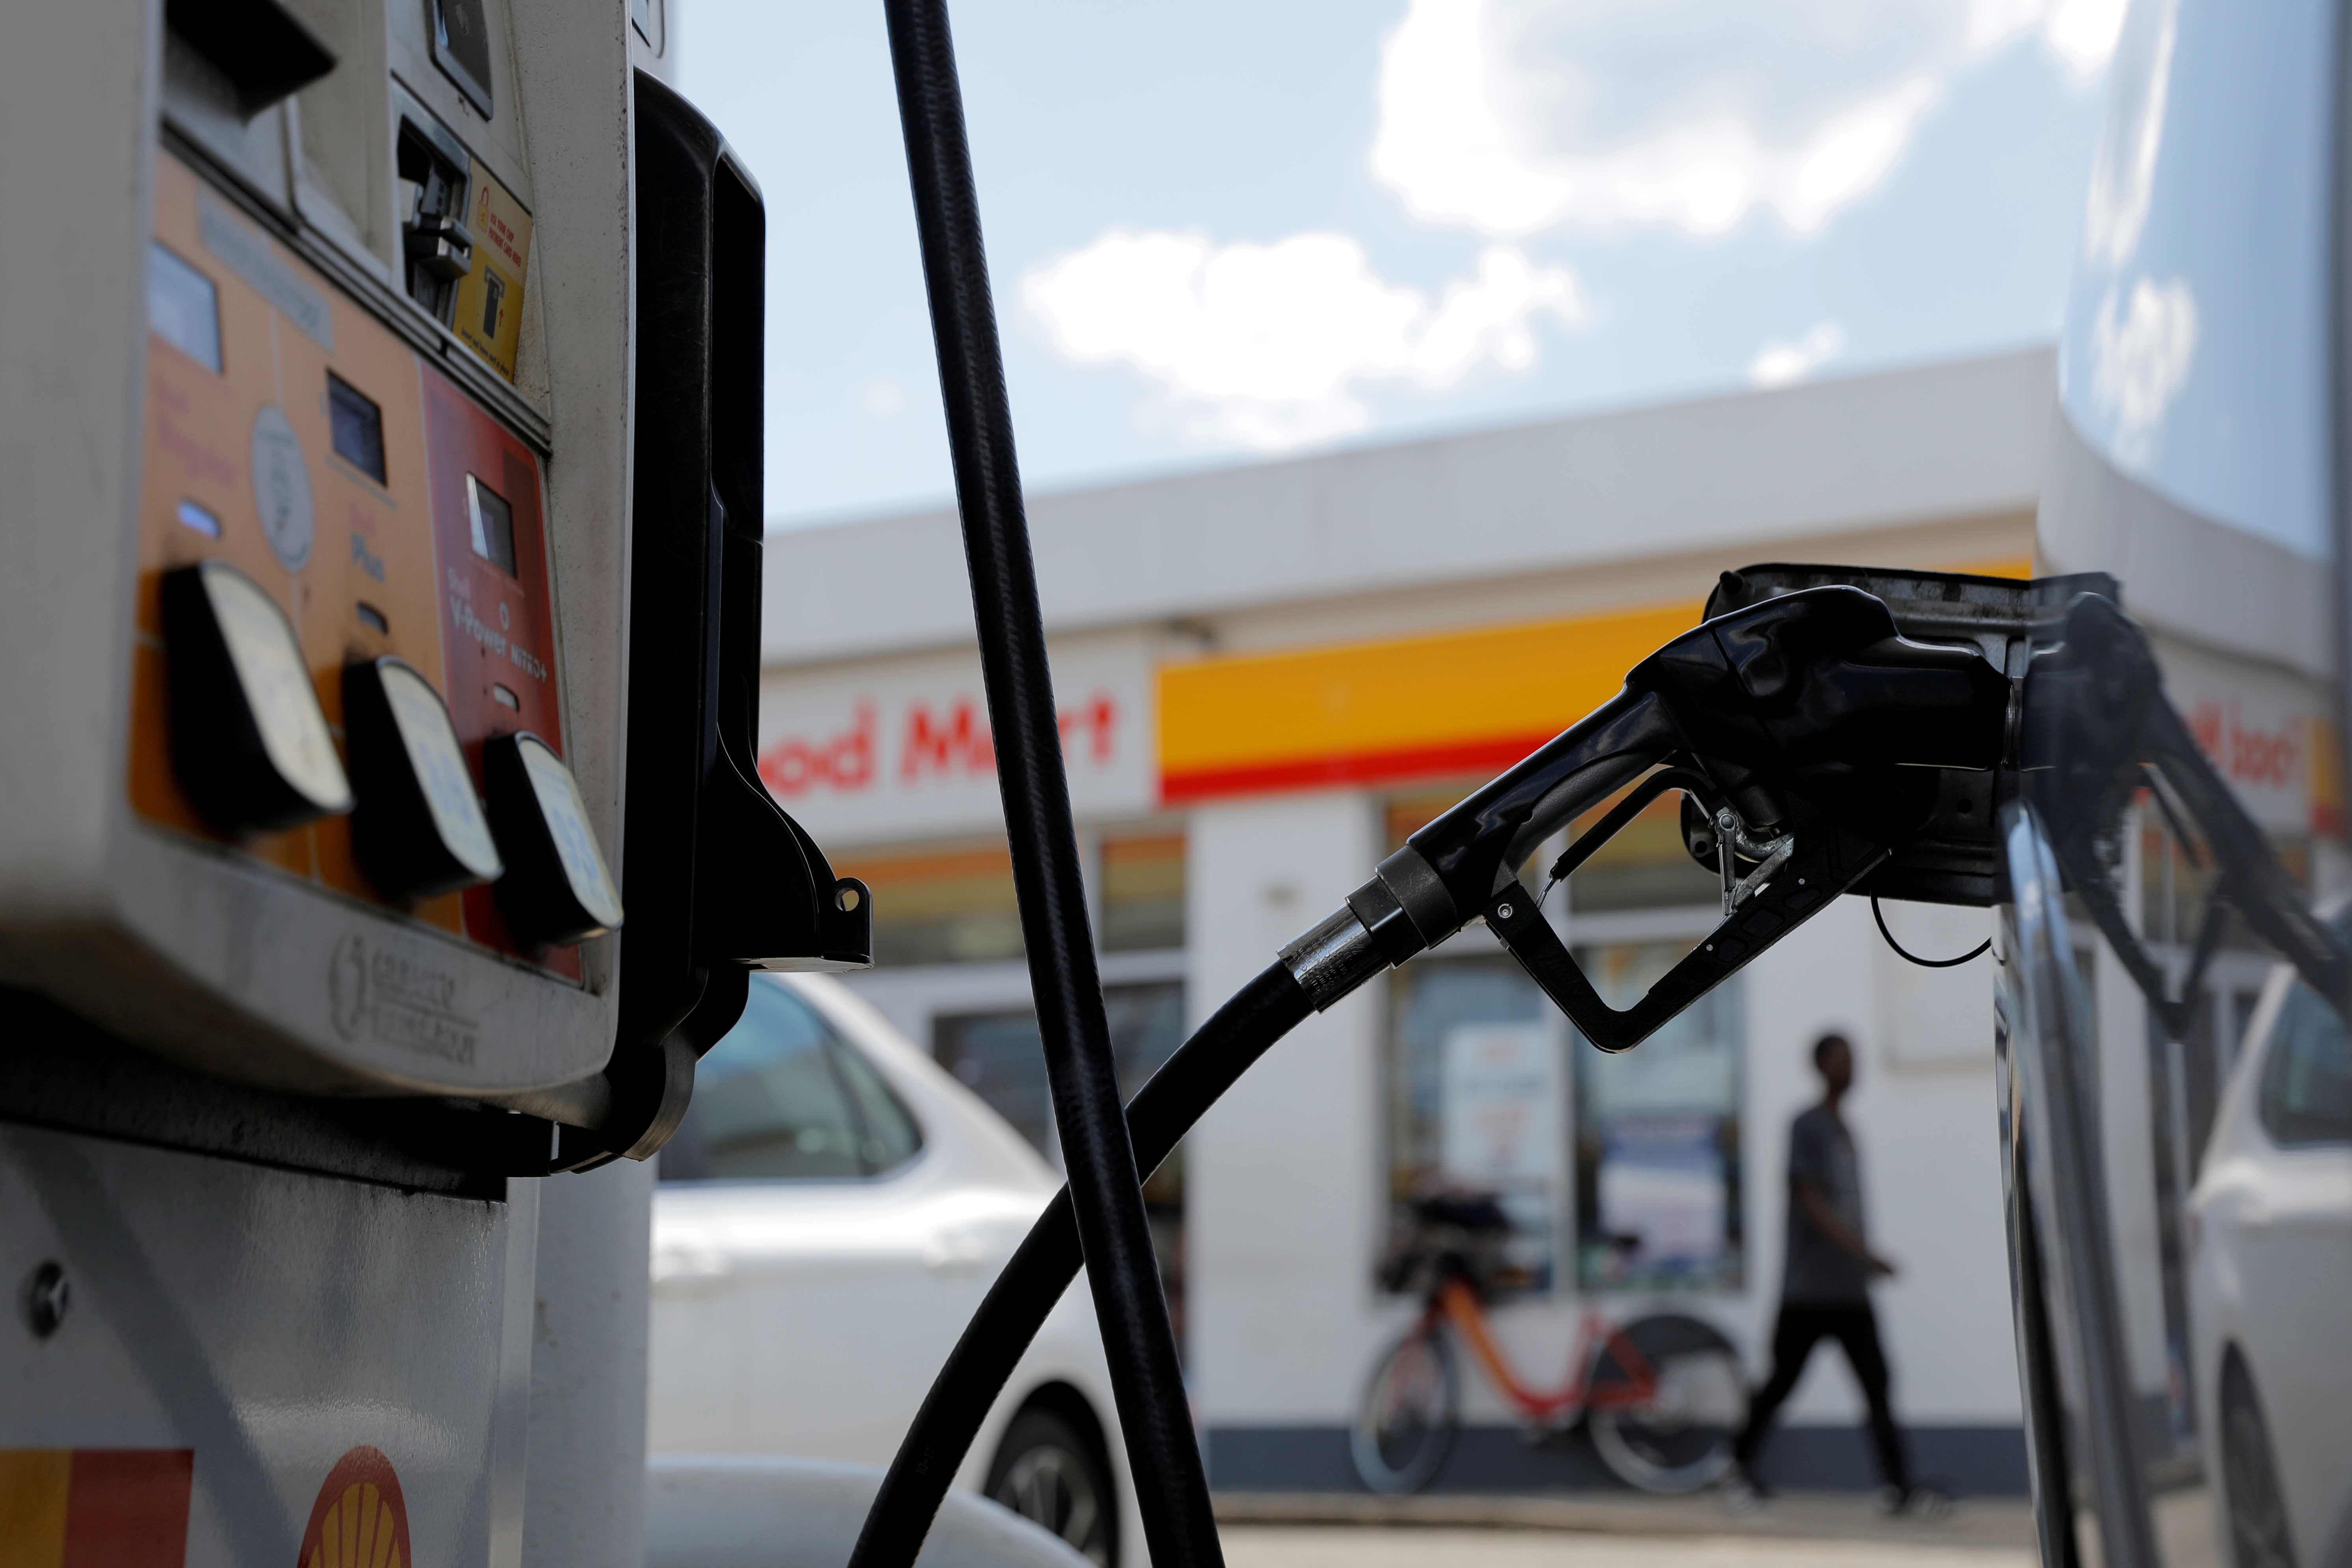 A gas pump is seen in a car at a Shell gas station in Washington, D.C., U.S., May 15, 2021. REUTERS/Andrew Kelly/File Photo